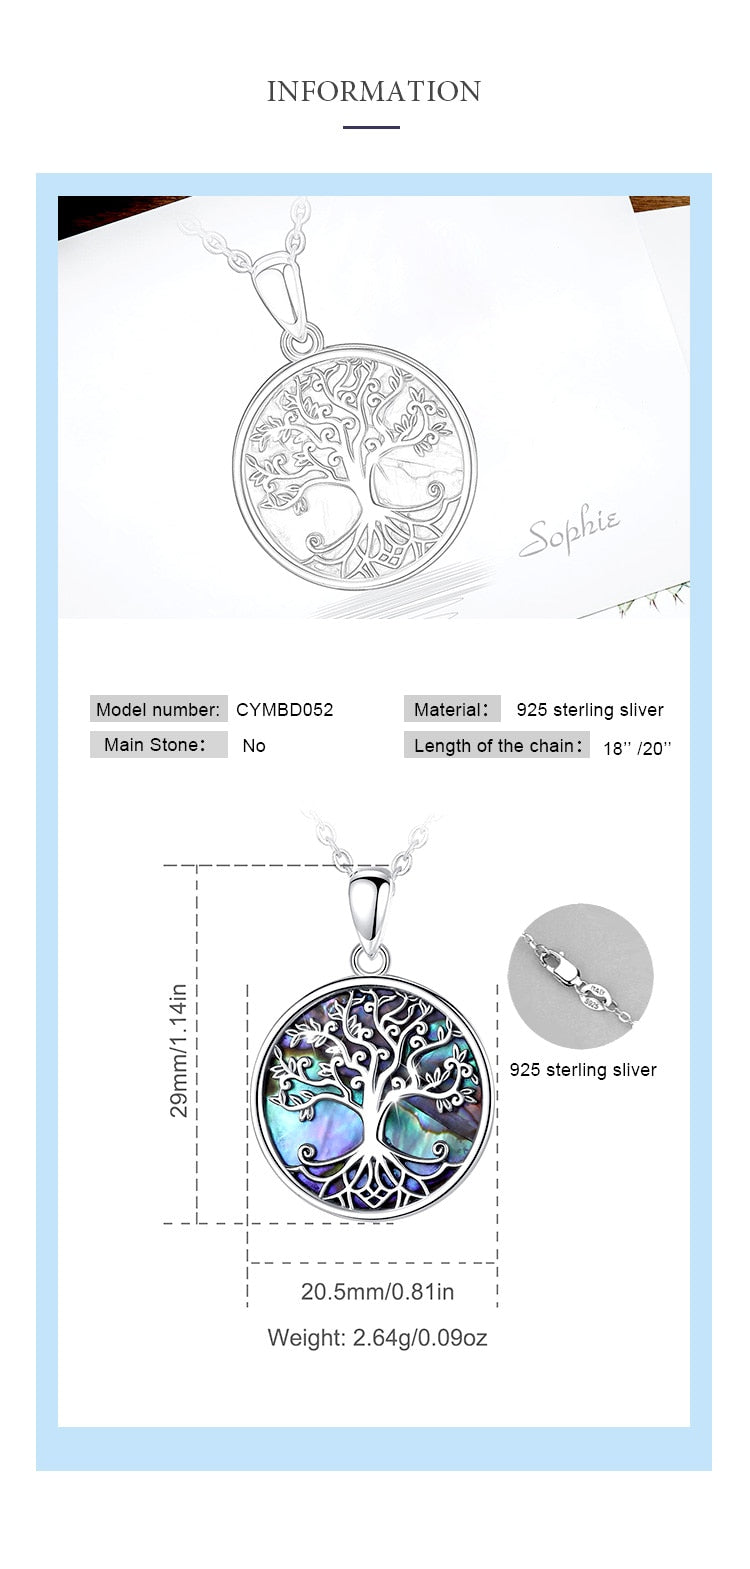 1TREE1LIFE™ Tree Of Life 925 Sterling Silver Necklace